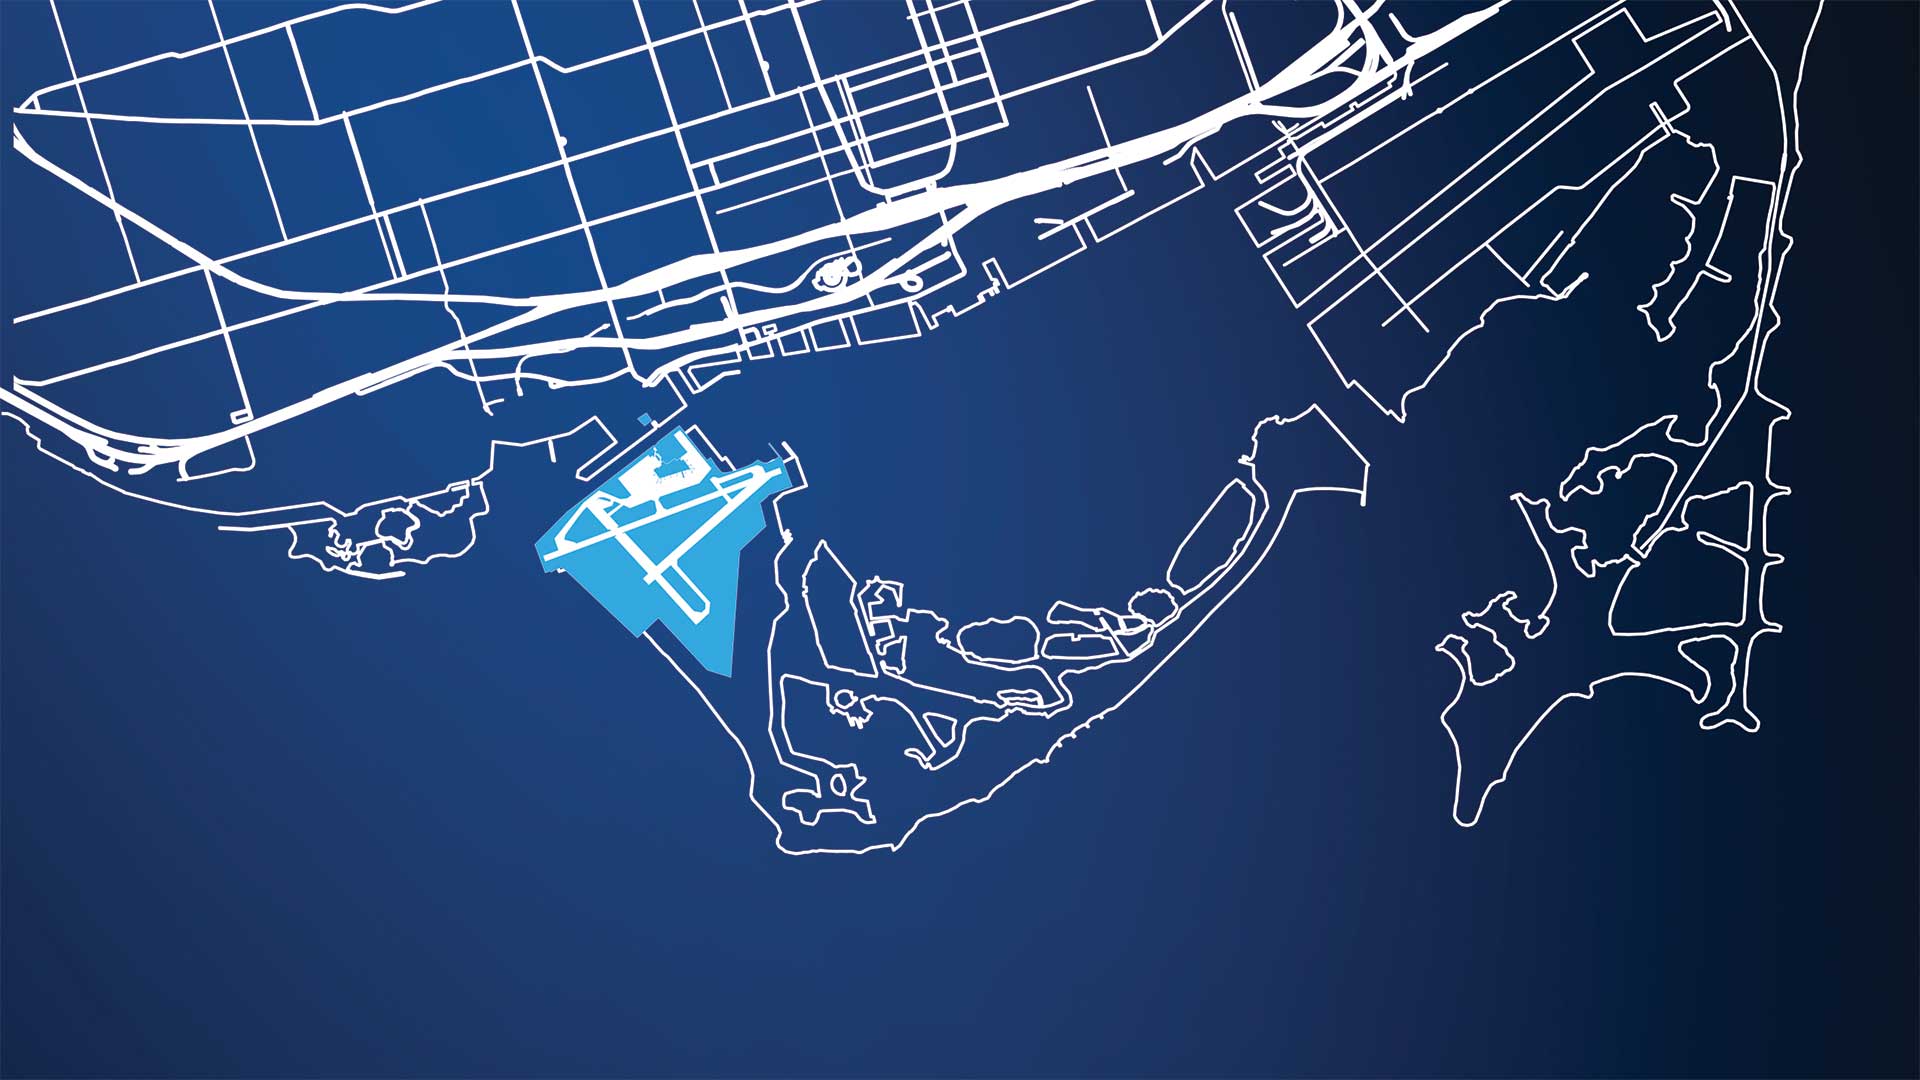 A map of downtown Toronto with Billy Bishop Toronto City Airport highlighted